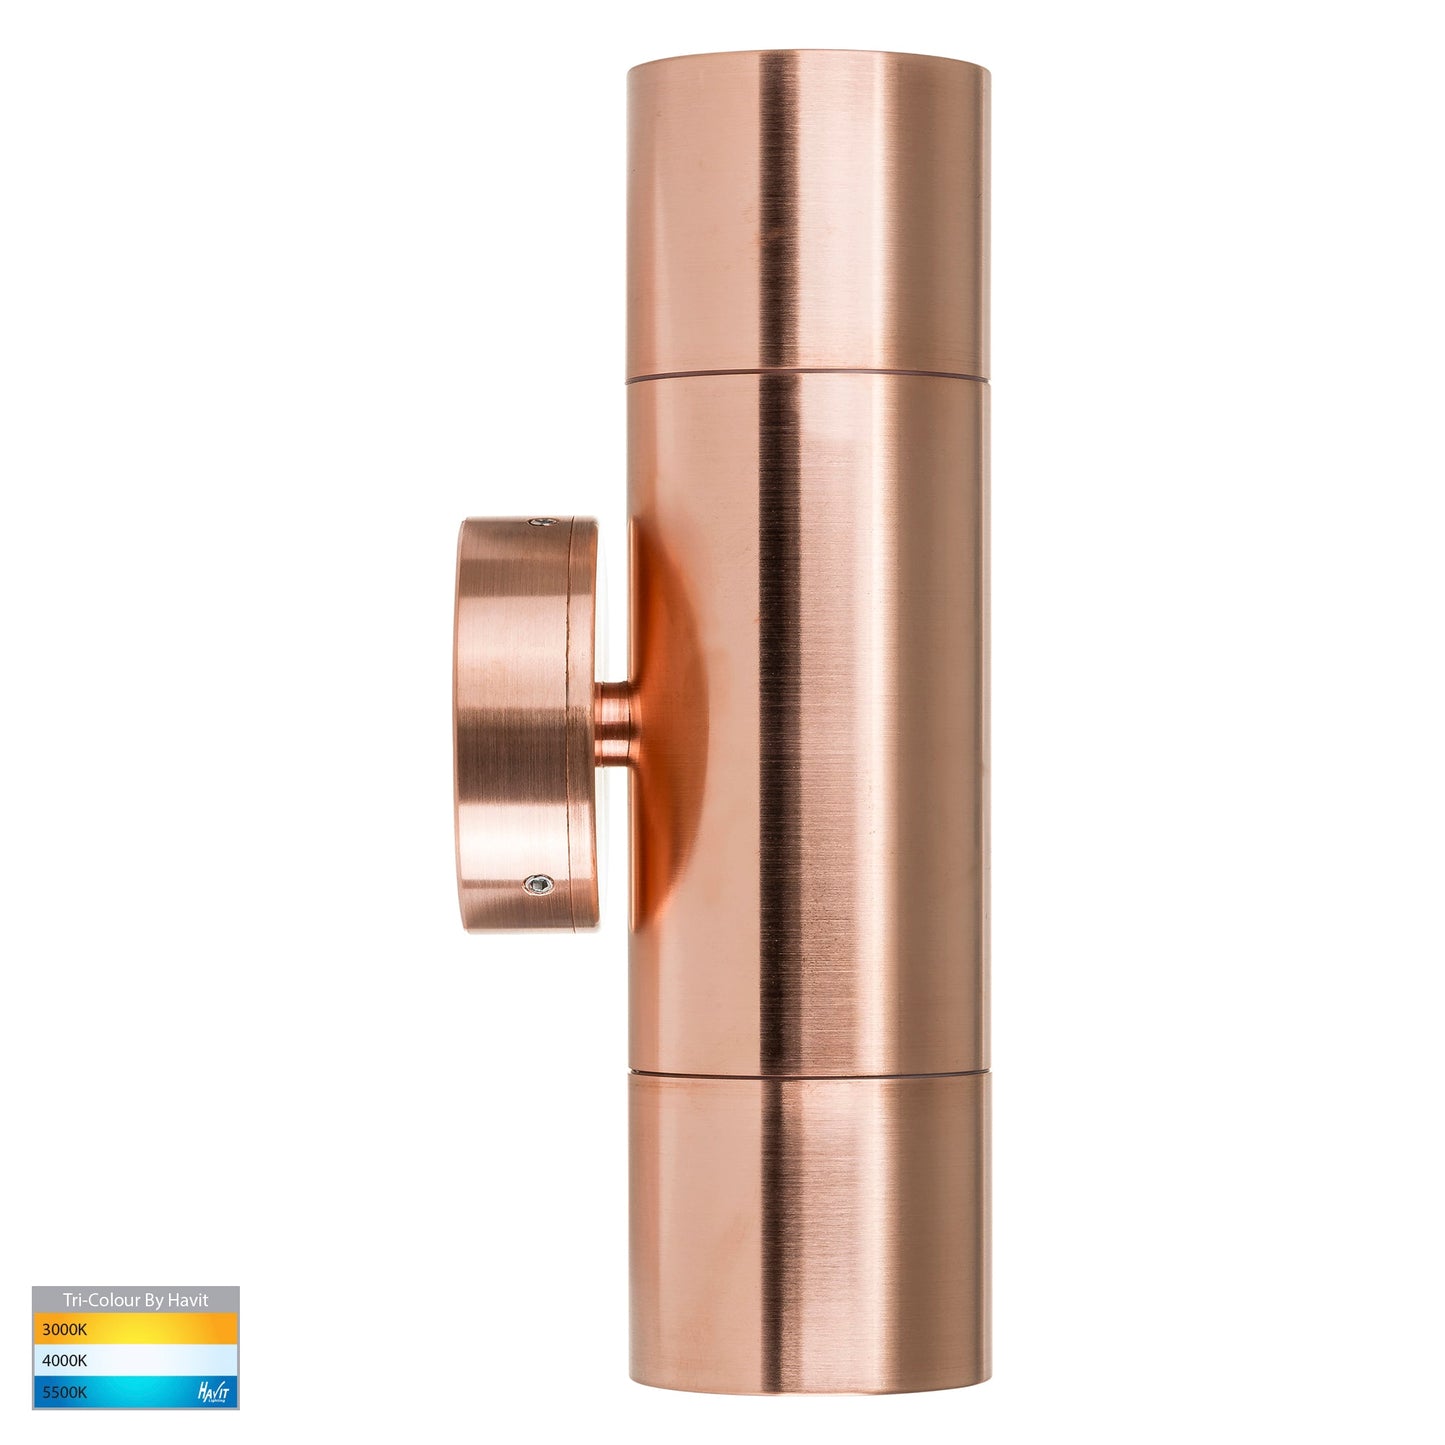 Hv1015t-Hv1017t - Tivah Solid Copper Tri Colour Up and Down Wall Pillar Lights